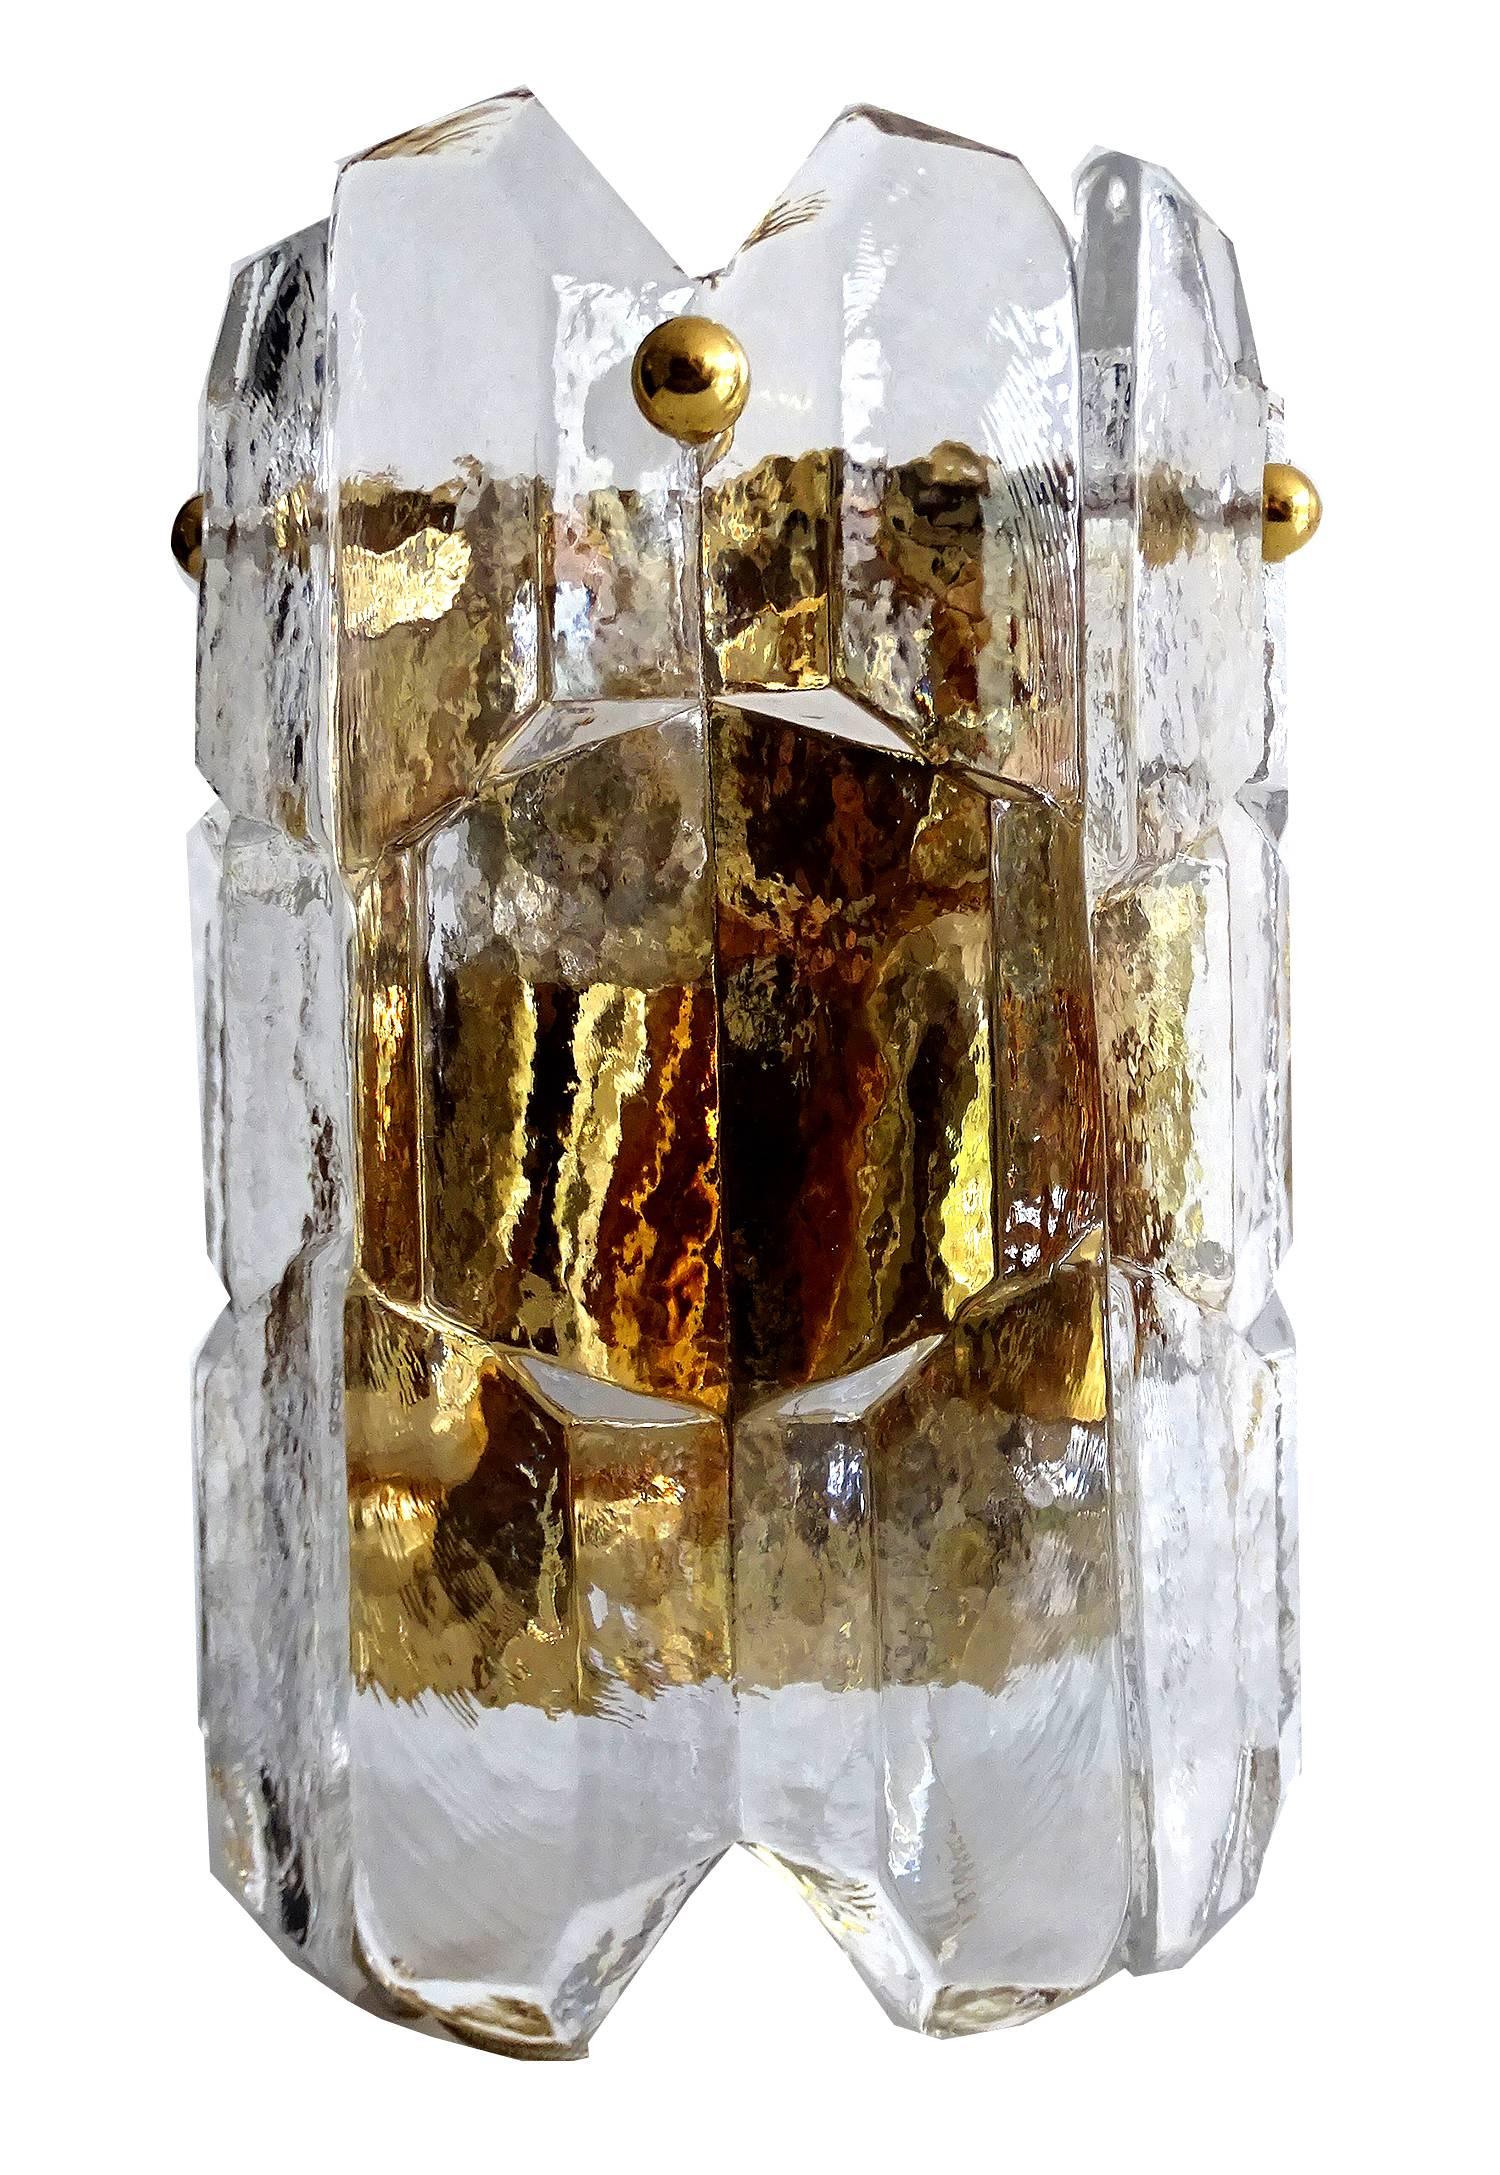 Rare and fabulous  vintage Mid-Century sconce by Kalmar with handcrafted Seguso Murano glass, it has a gilded brass base with two fittings,  each for e12 candelabra size screw bulbs to illuminate, and thick wet ice style prisms with a nice natural